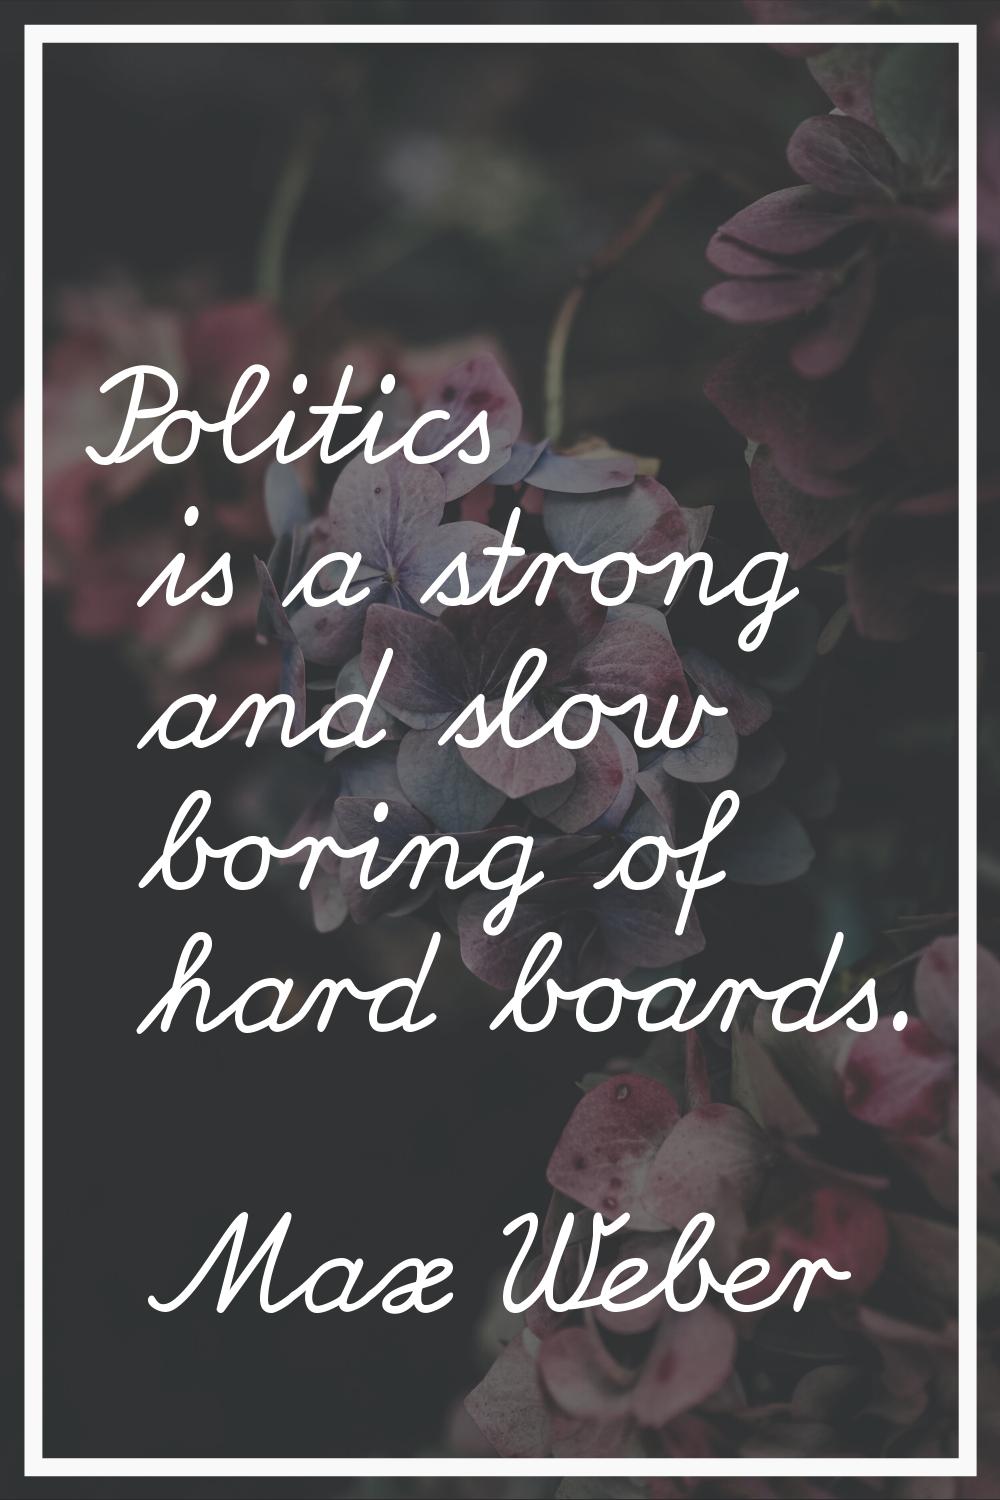 Politics is a strong and slow boring of hard boards.